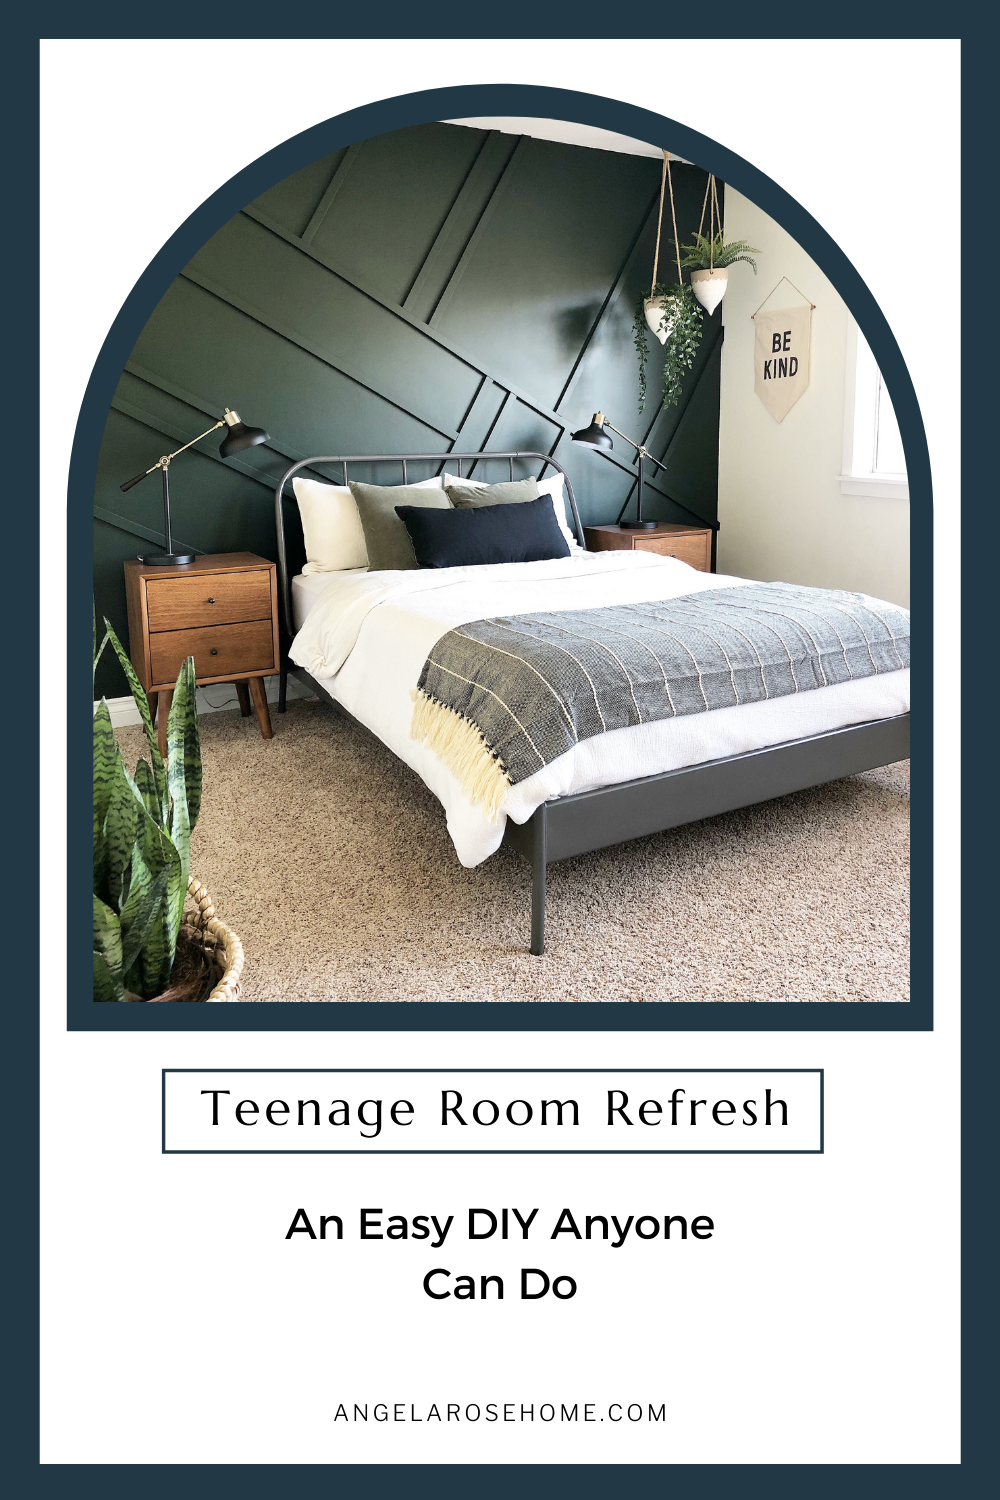 Try easy DIY projects to refresh your teenager's room. www.angelarosehome.com